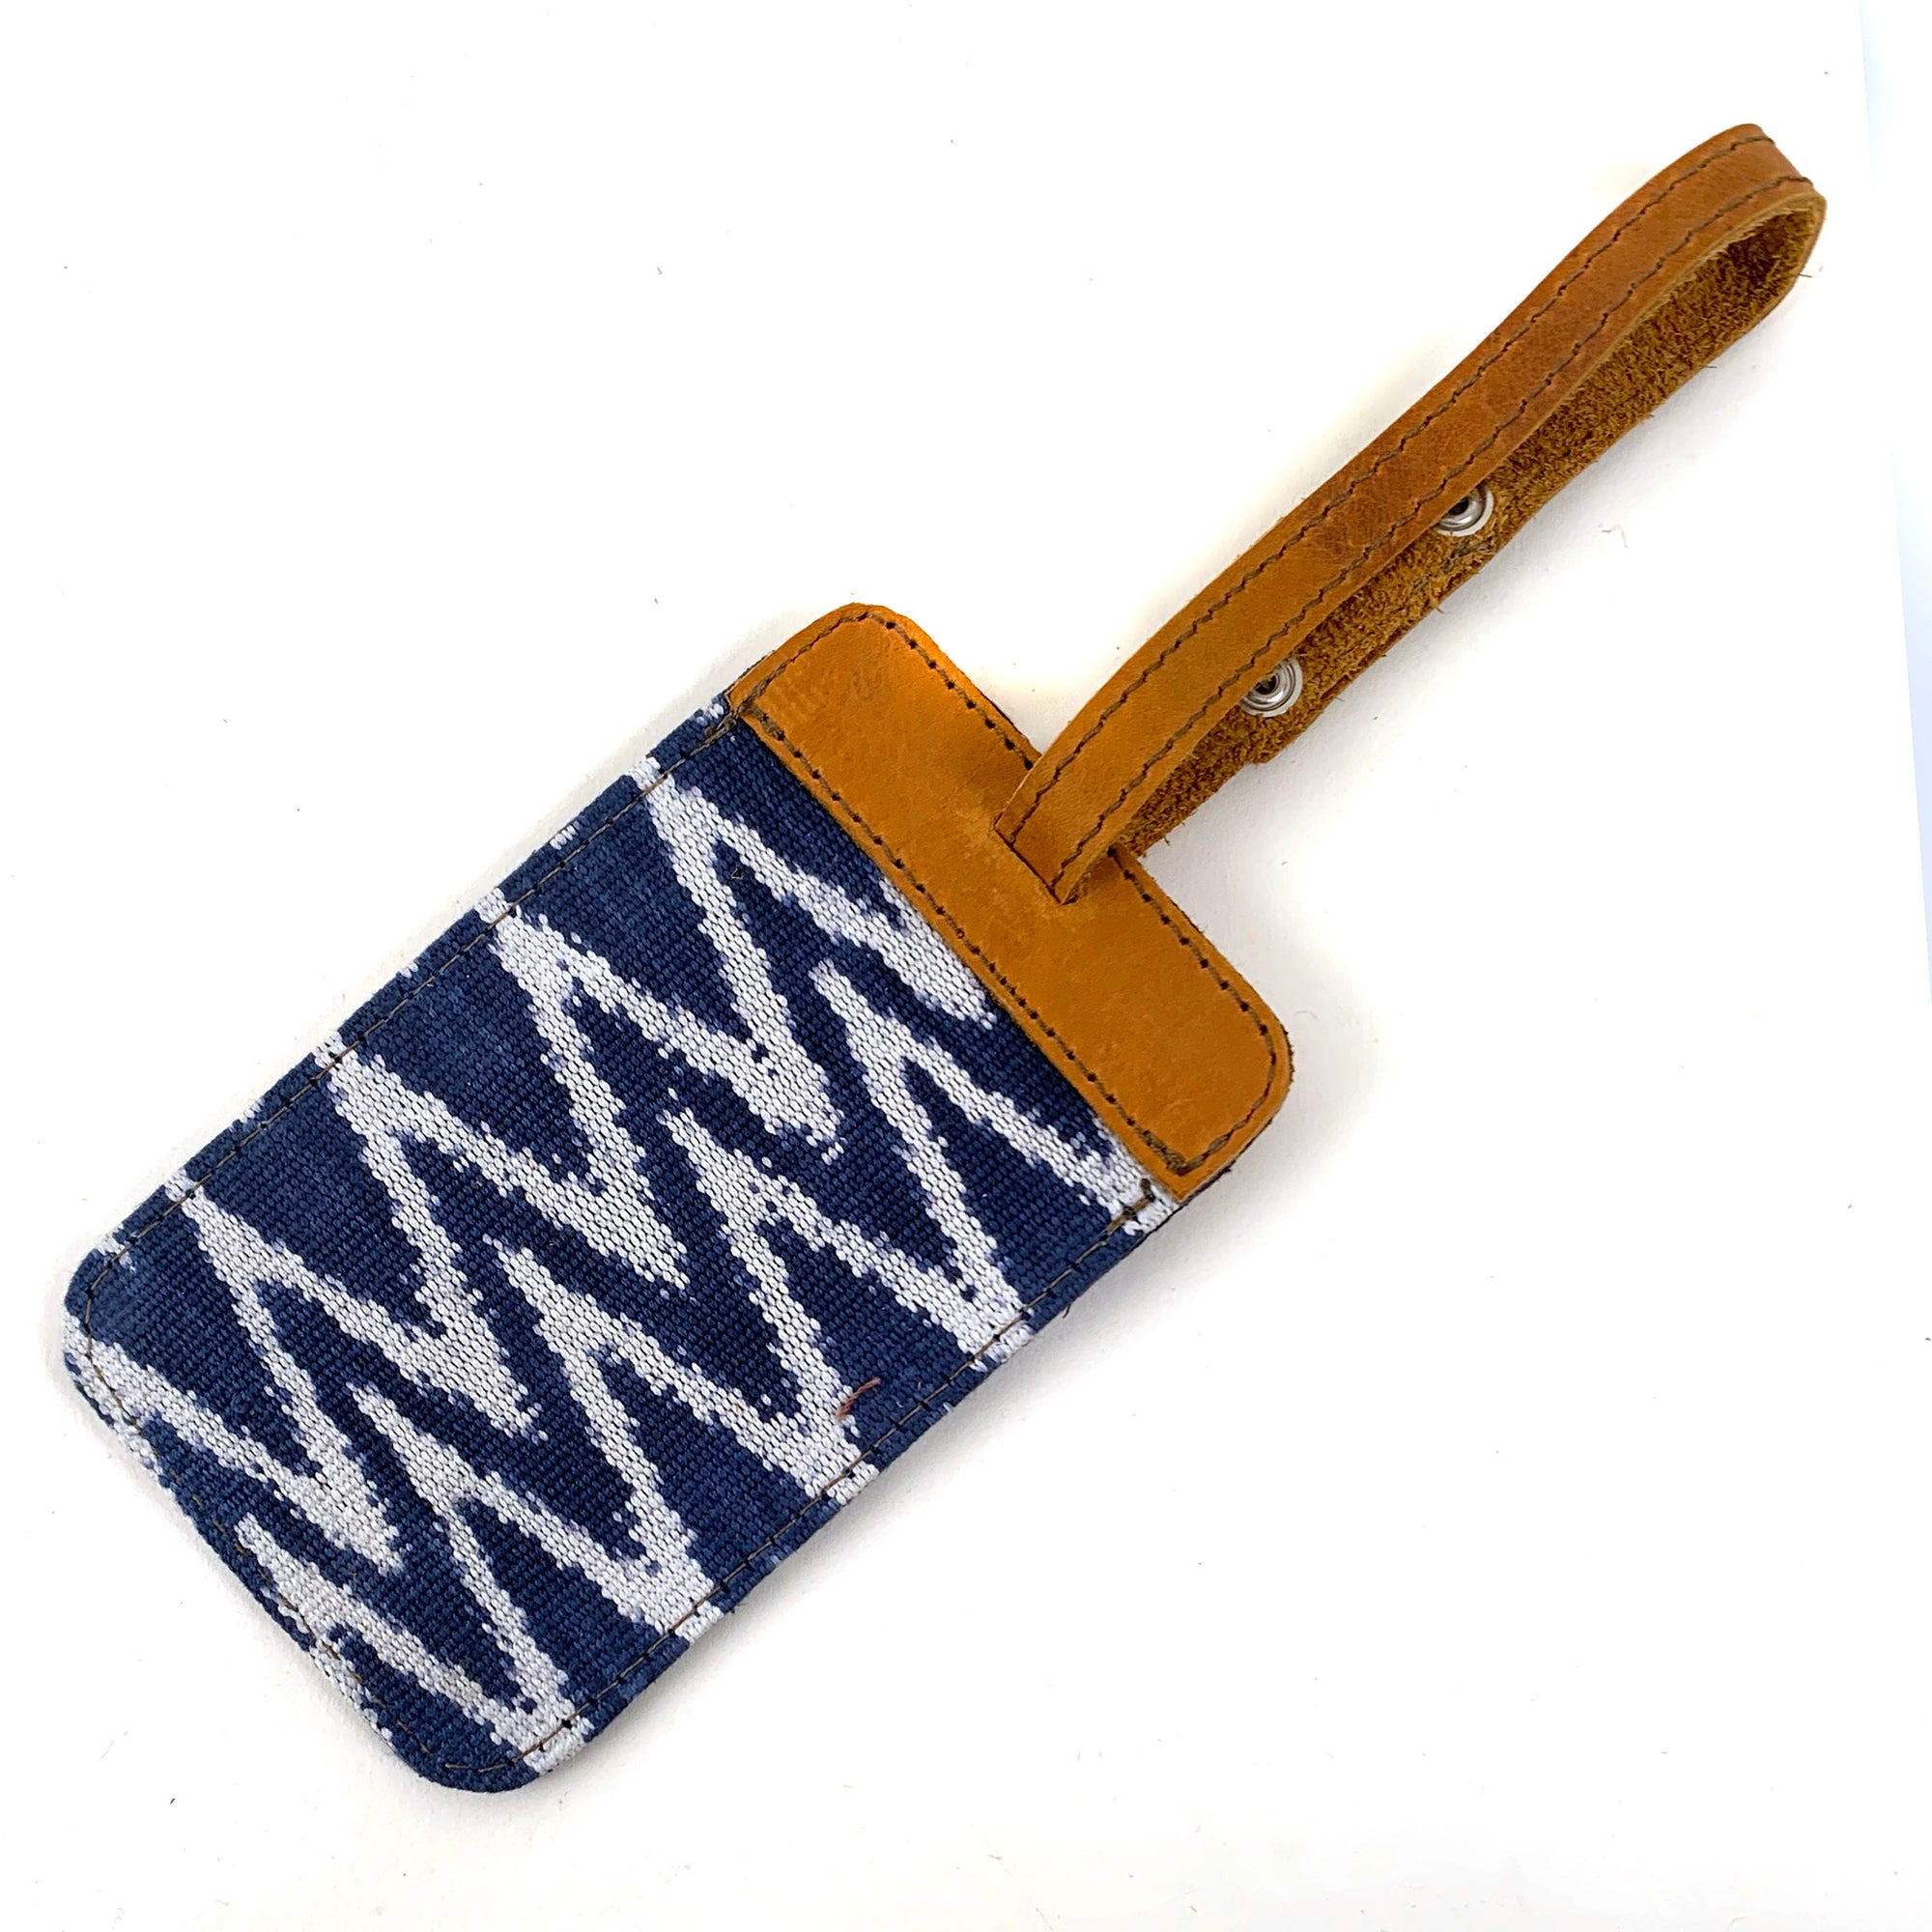 Handwoven ikat luggage tag with leather trim | Mayan Hands